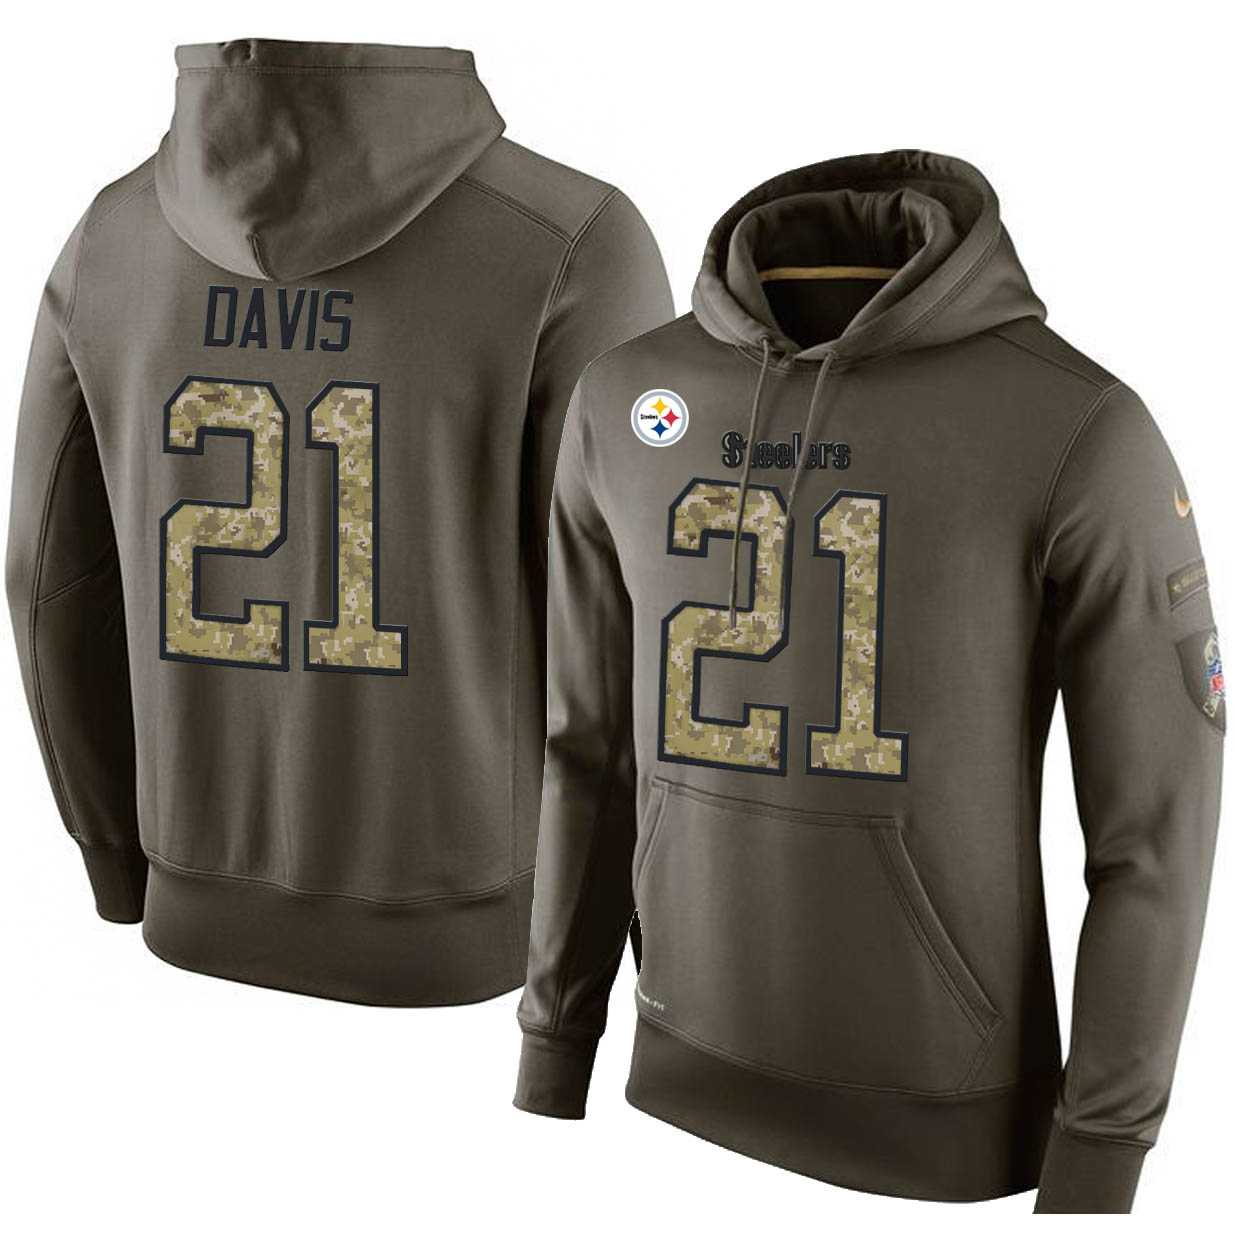 NFL Men's Nike Pittsburgh Steelers #21 Sean Davis Stitched Green Olive Salute To Service KO Performance Hoodie